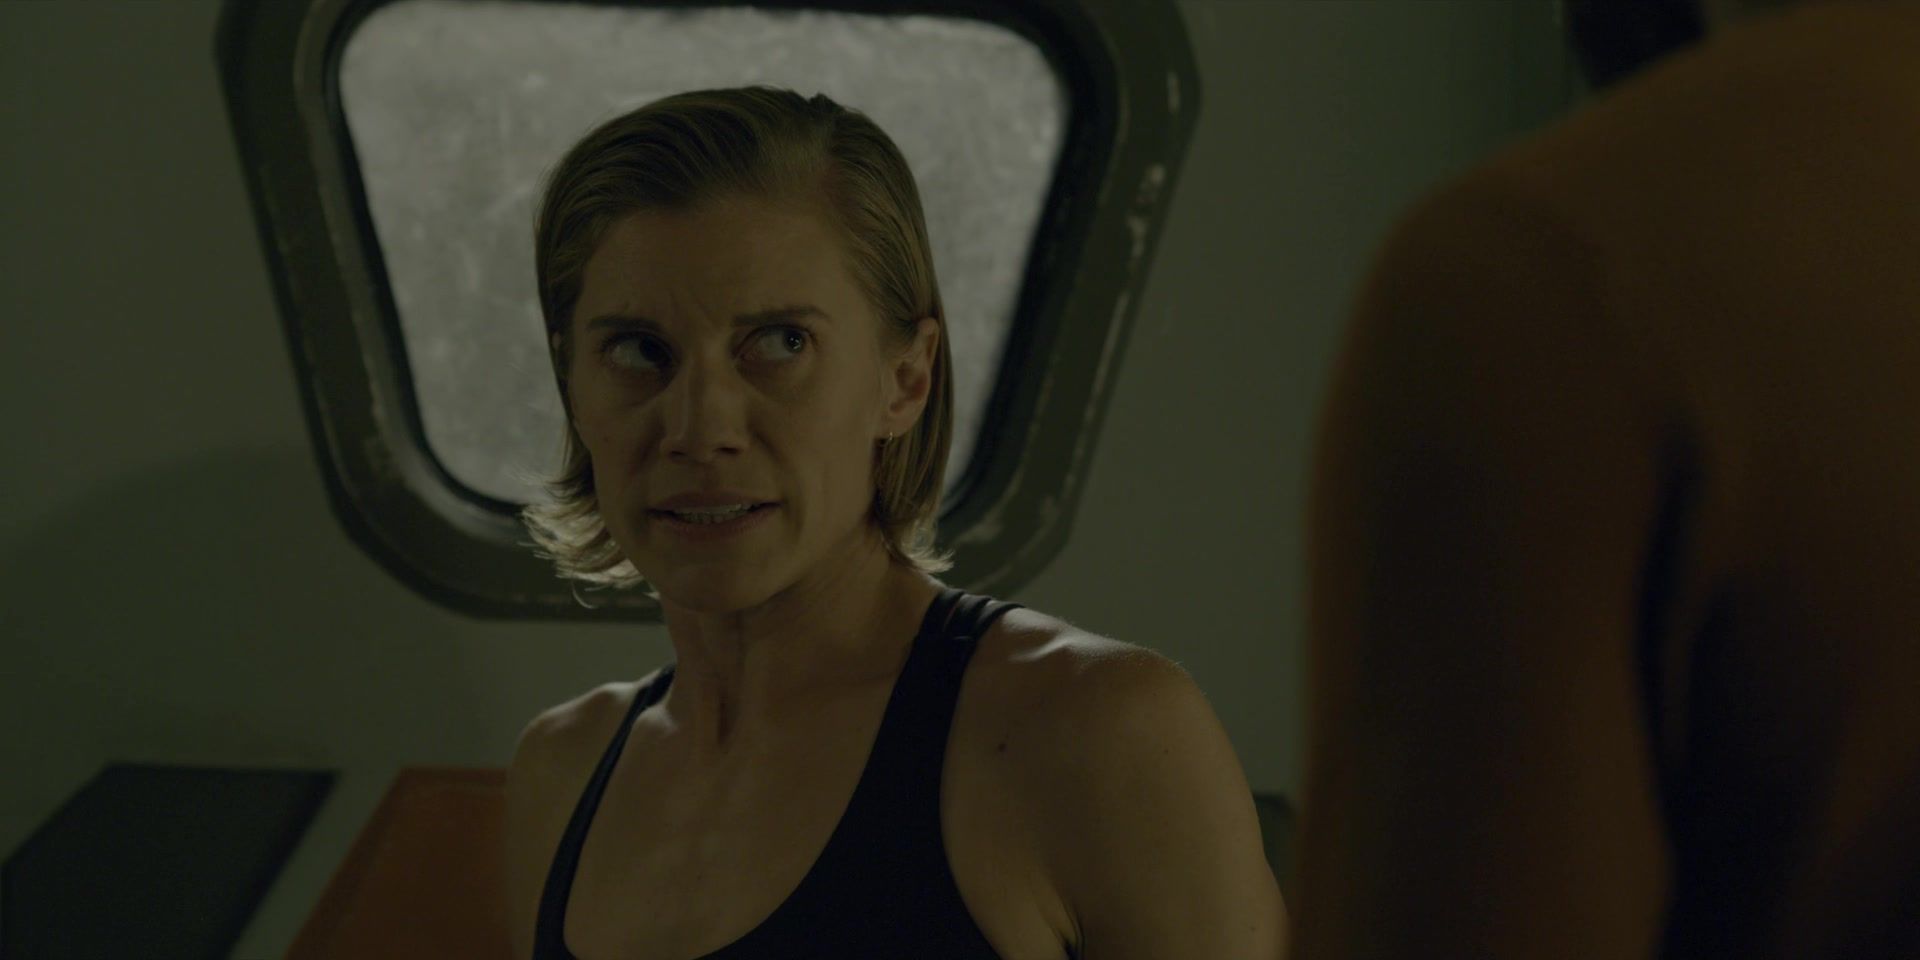 JavSt(ar's) Katee Sackhoff nude - Another Life s01e01 (2019) NSFW